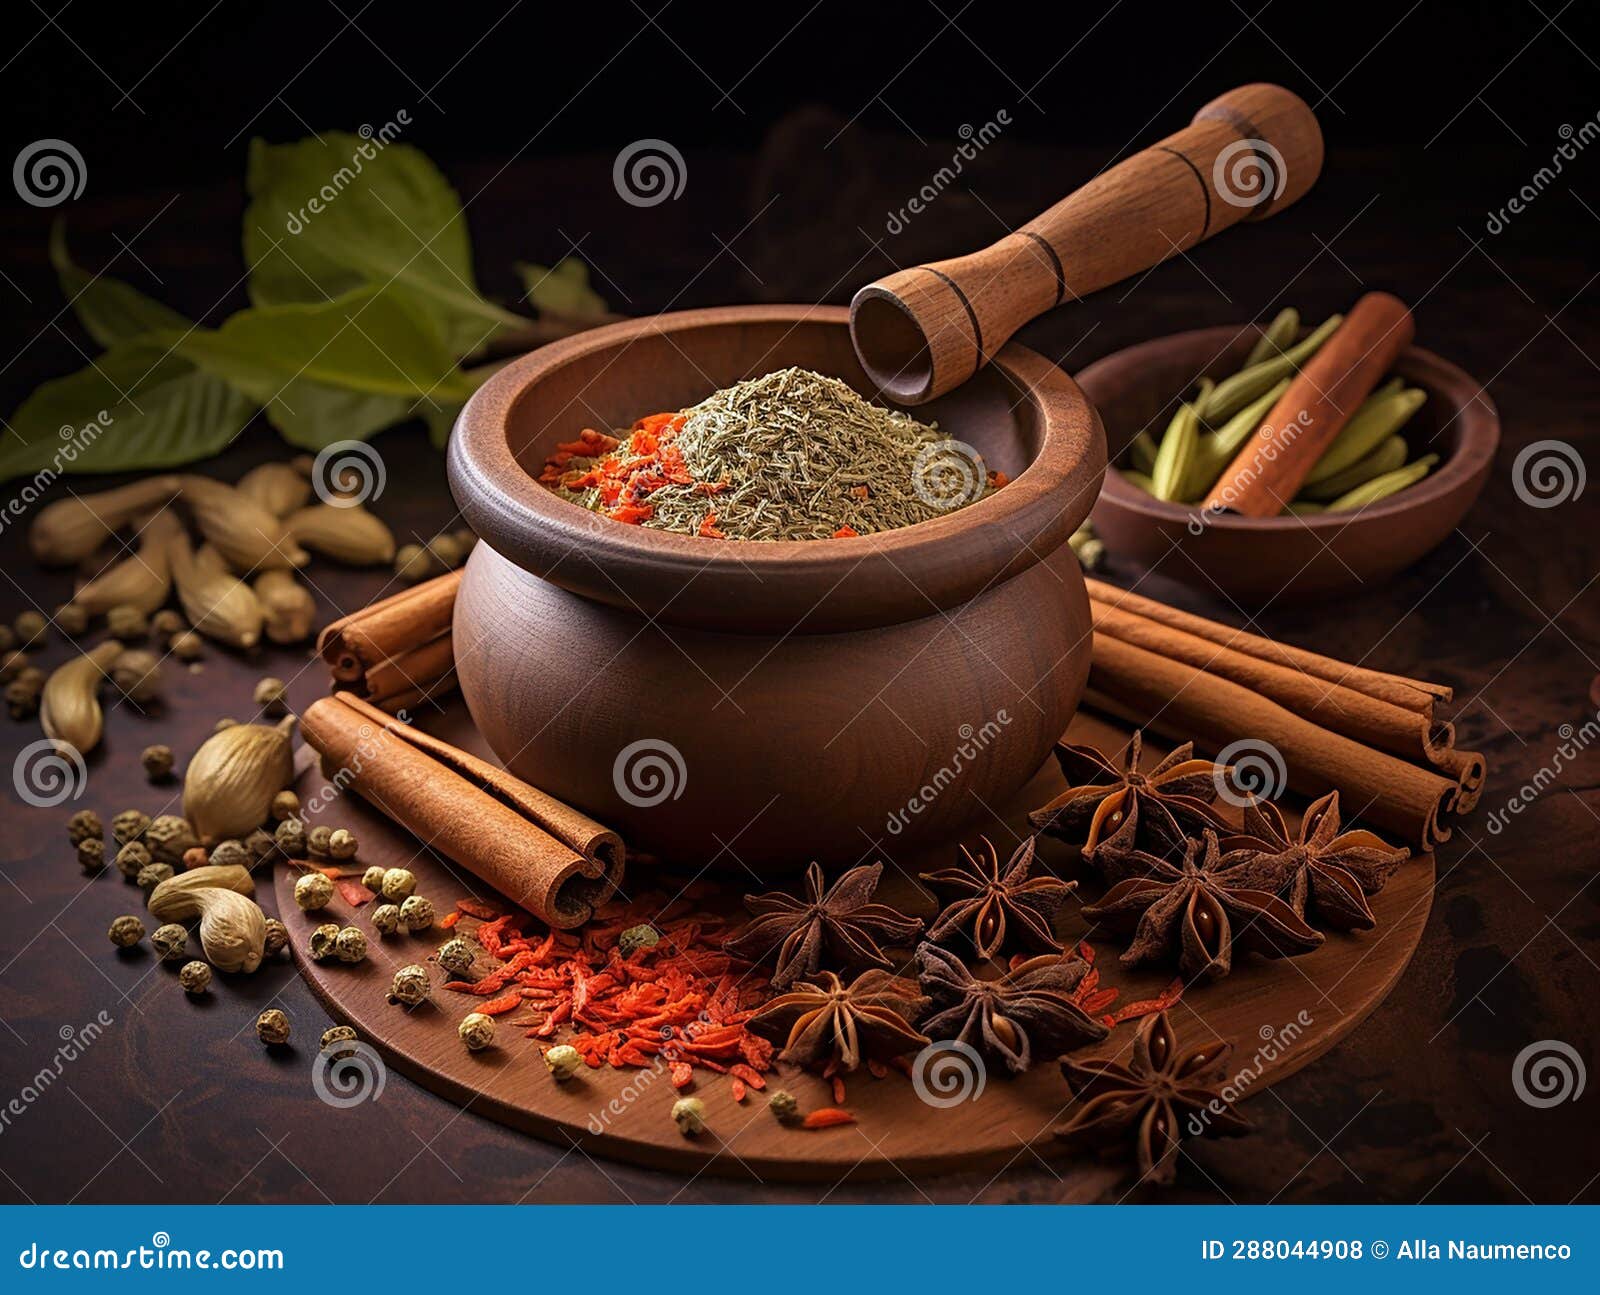 mortar and pestle with whole spices